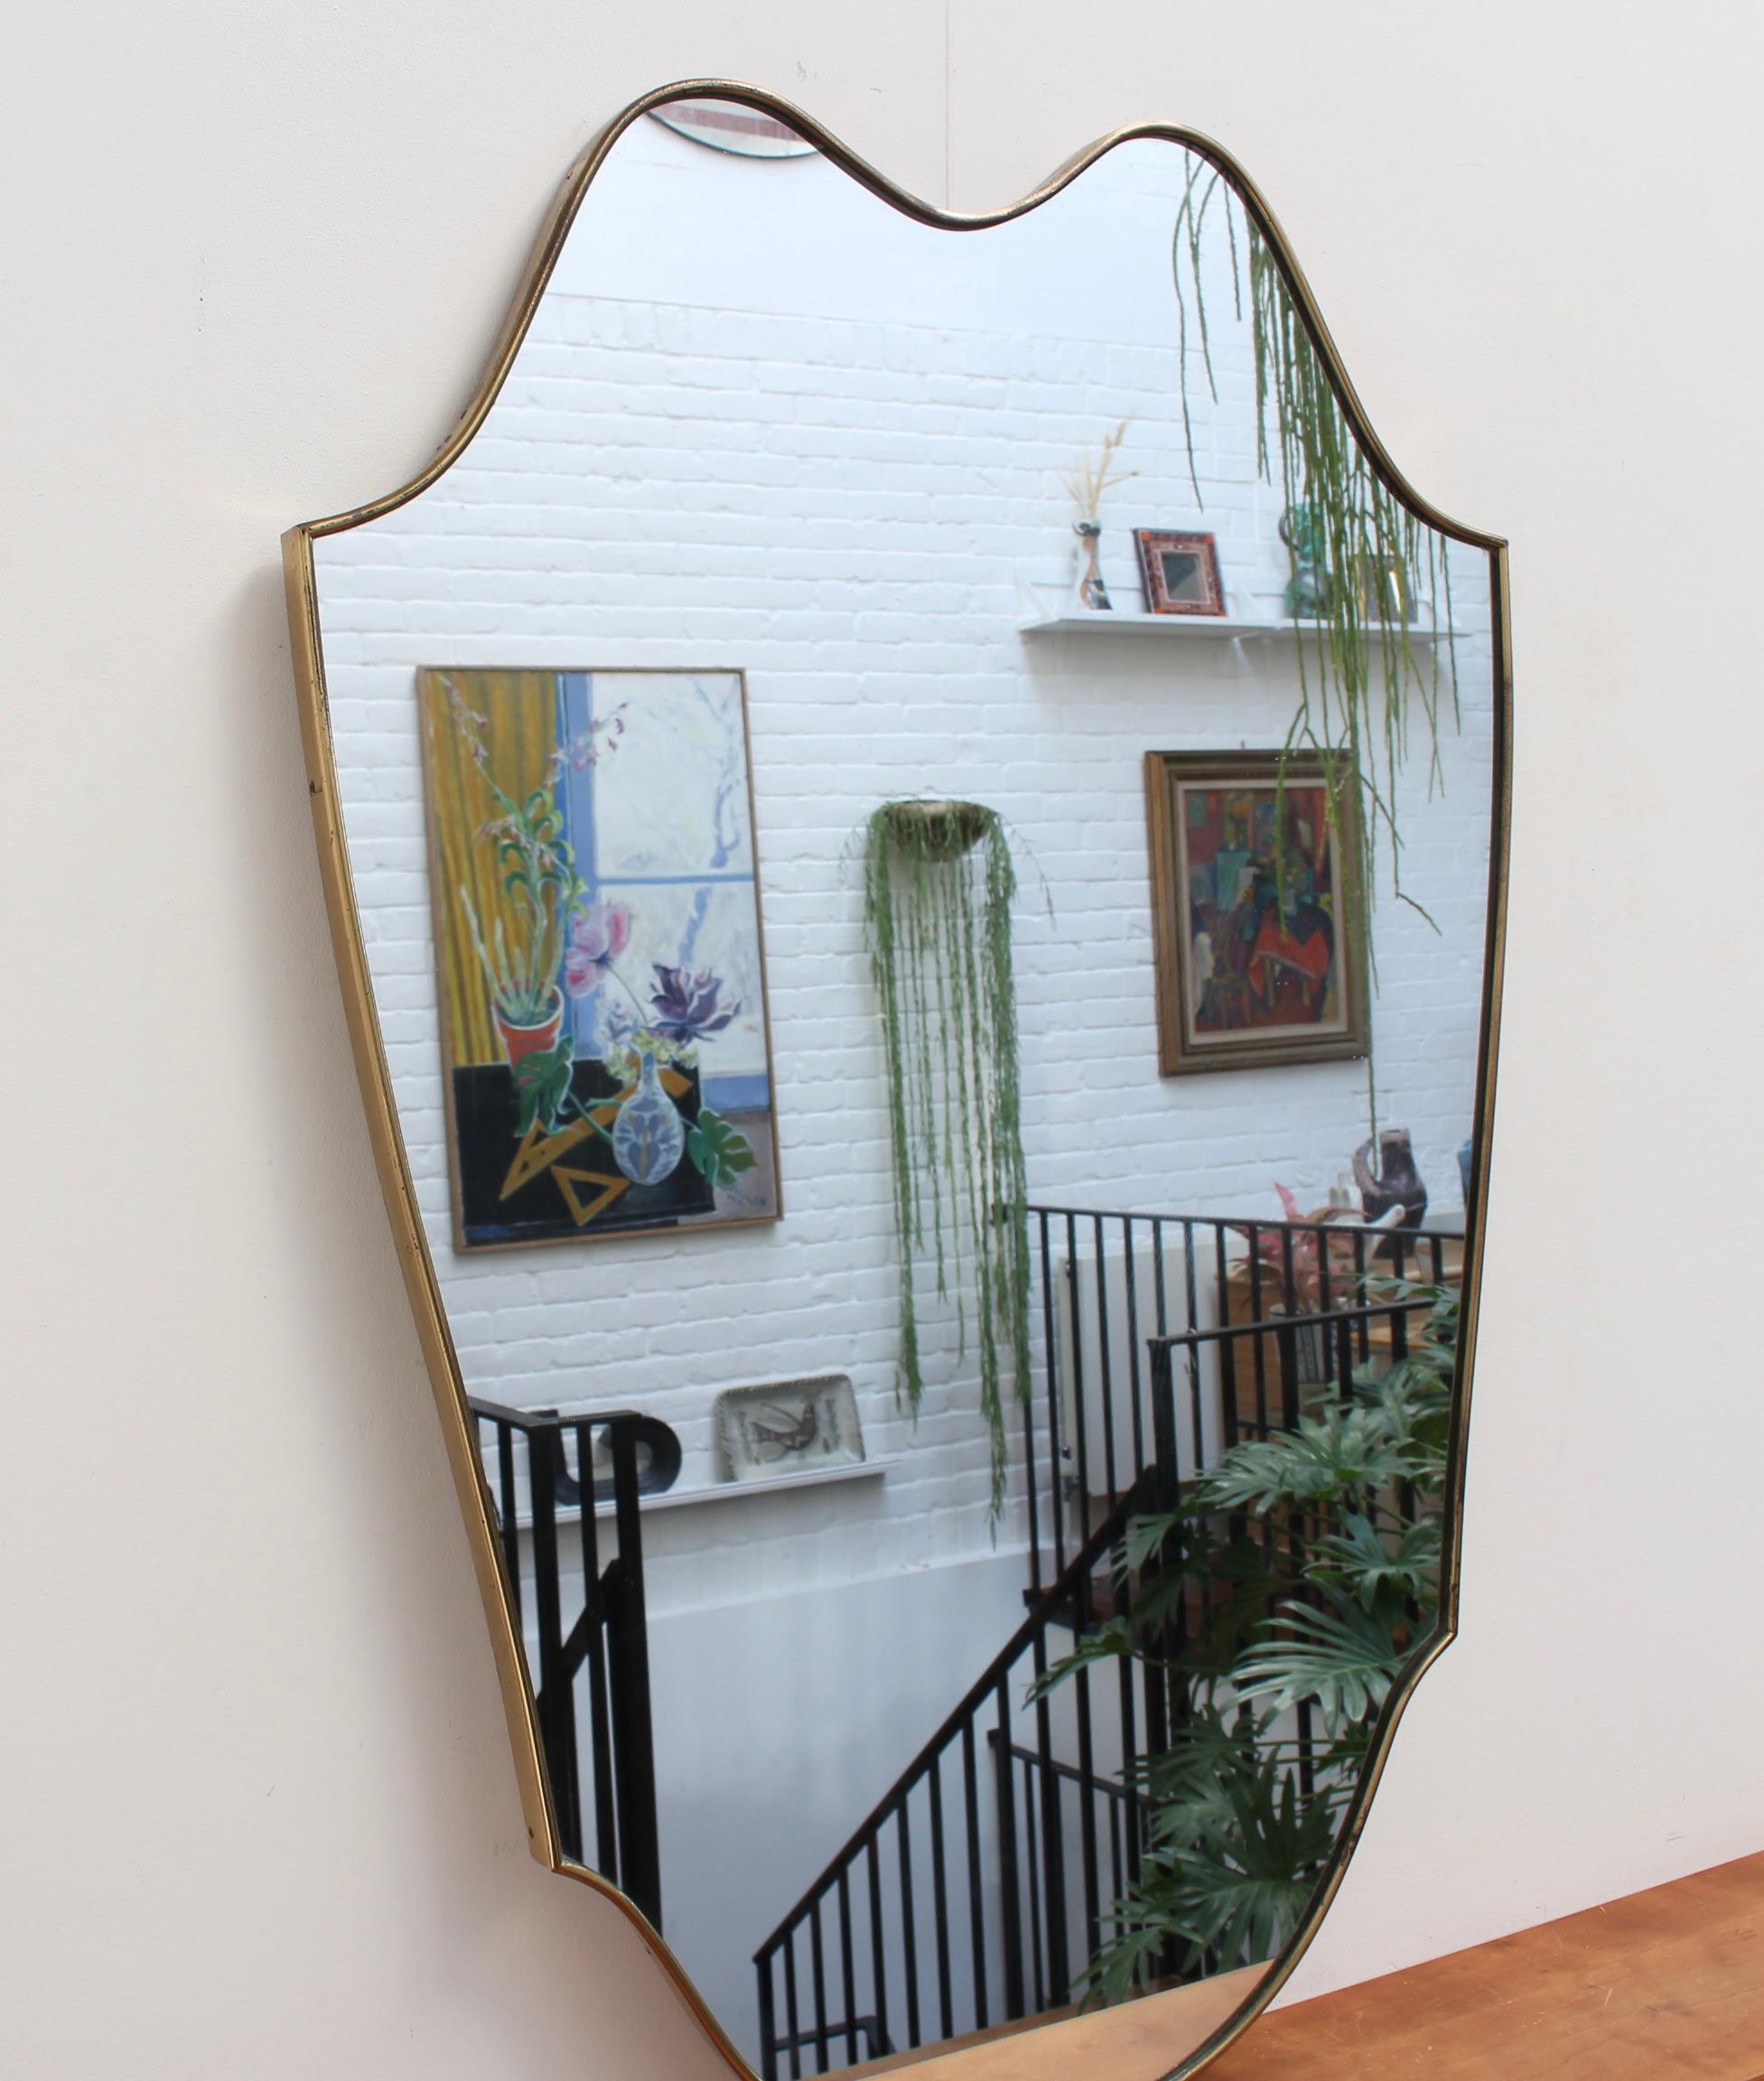 Large mid-century Italian wall mirror with brass frame (circa 1950s). The mirror is classically-shaped and distinctive in a Modern style. The glass is in good condition - the frame has an aged, characterful patina and is in fair condition. It is